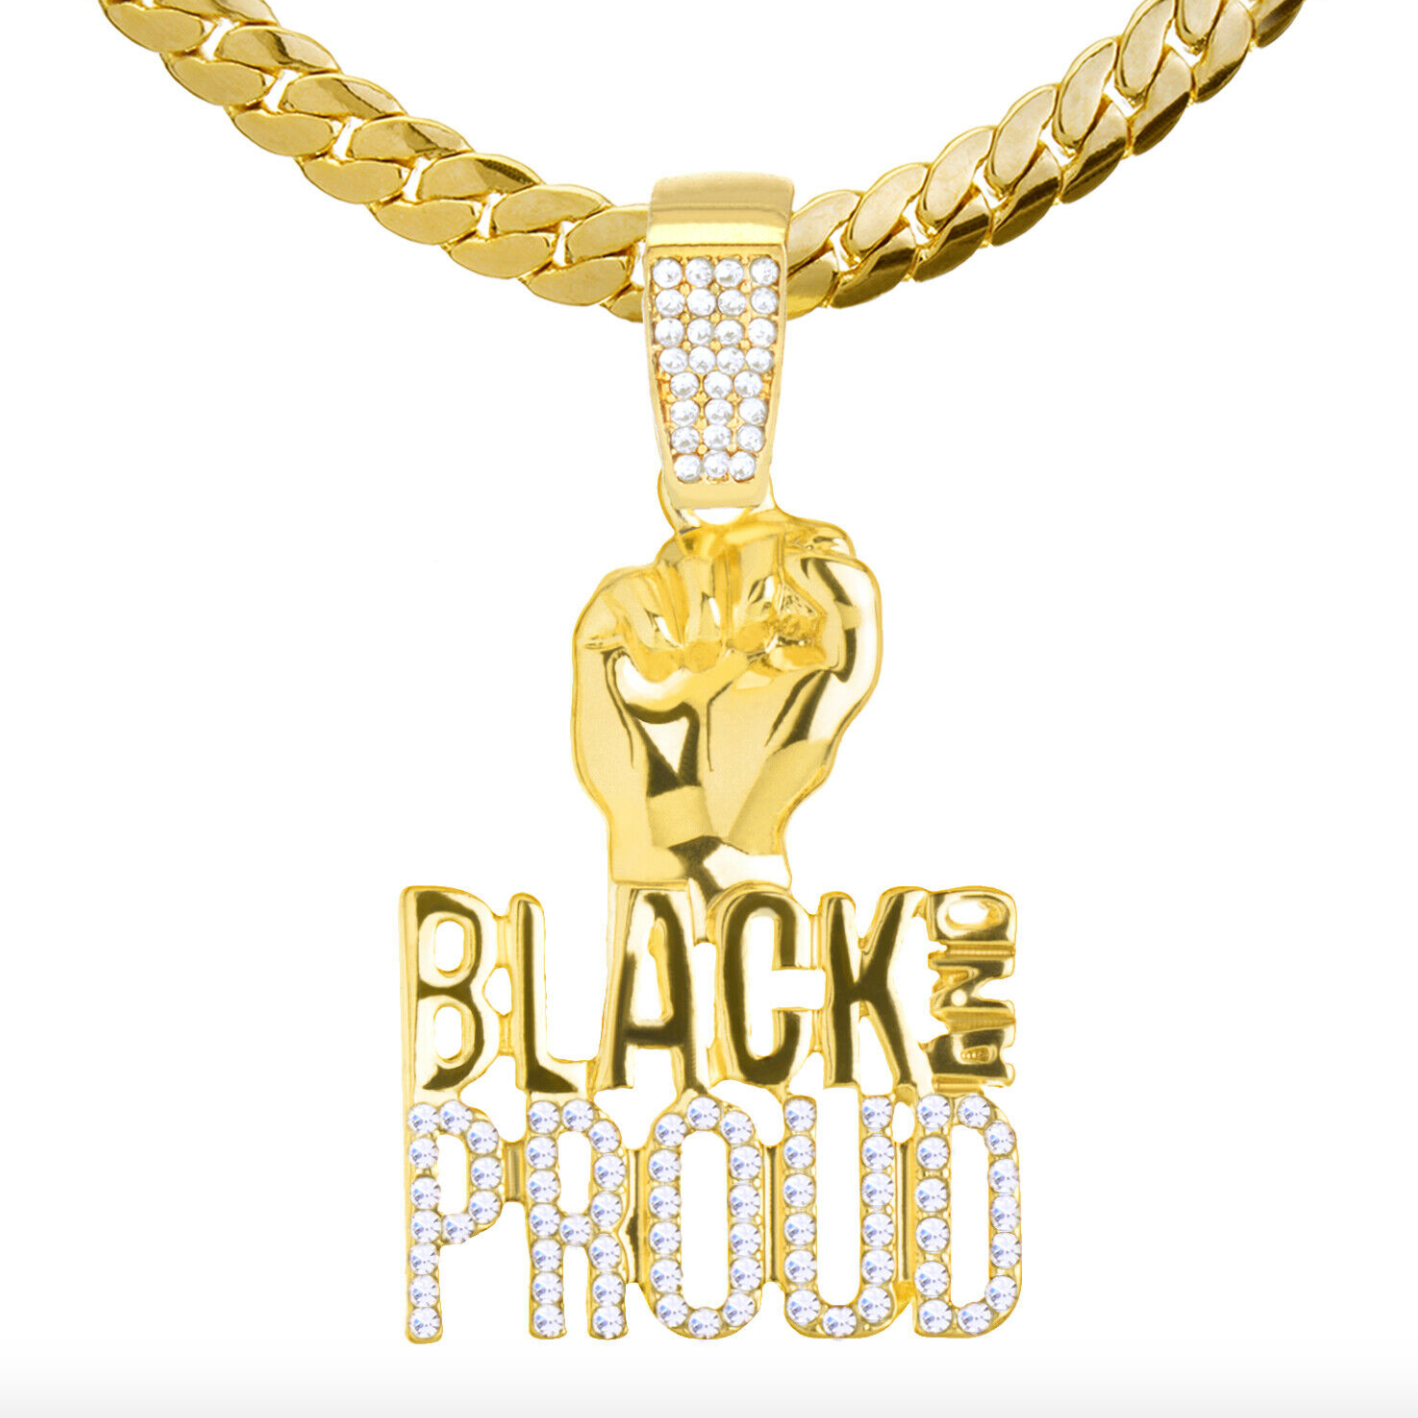 Simulated Diamond Black Lives Matter Necklace BLM Pendant Fist Gold Color Metal Alloy Chain Hip Hop Plated Black Proud Sign 24in.